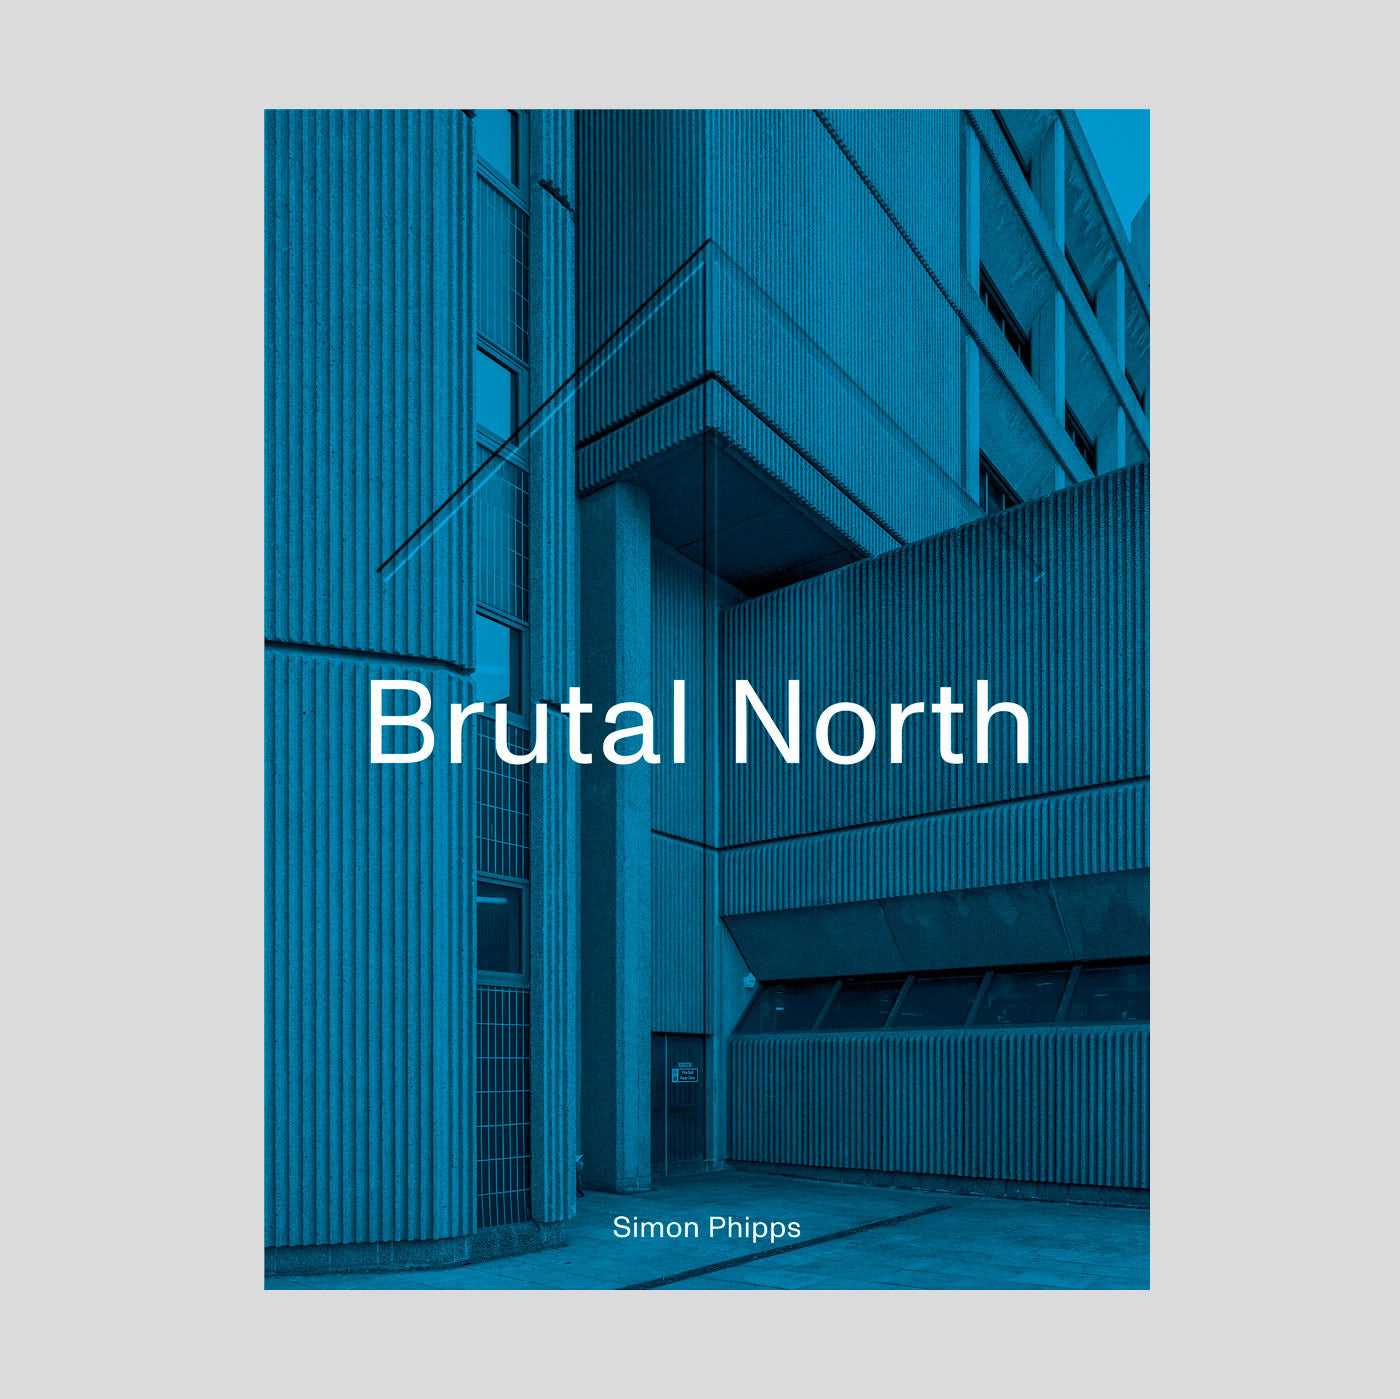 Brutal North: Post-War Modernist Architecture in the North of England | Simon Phipps.